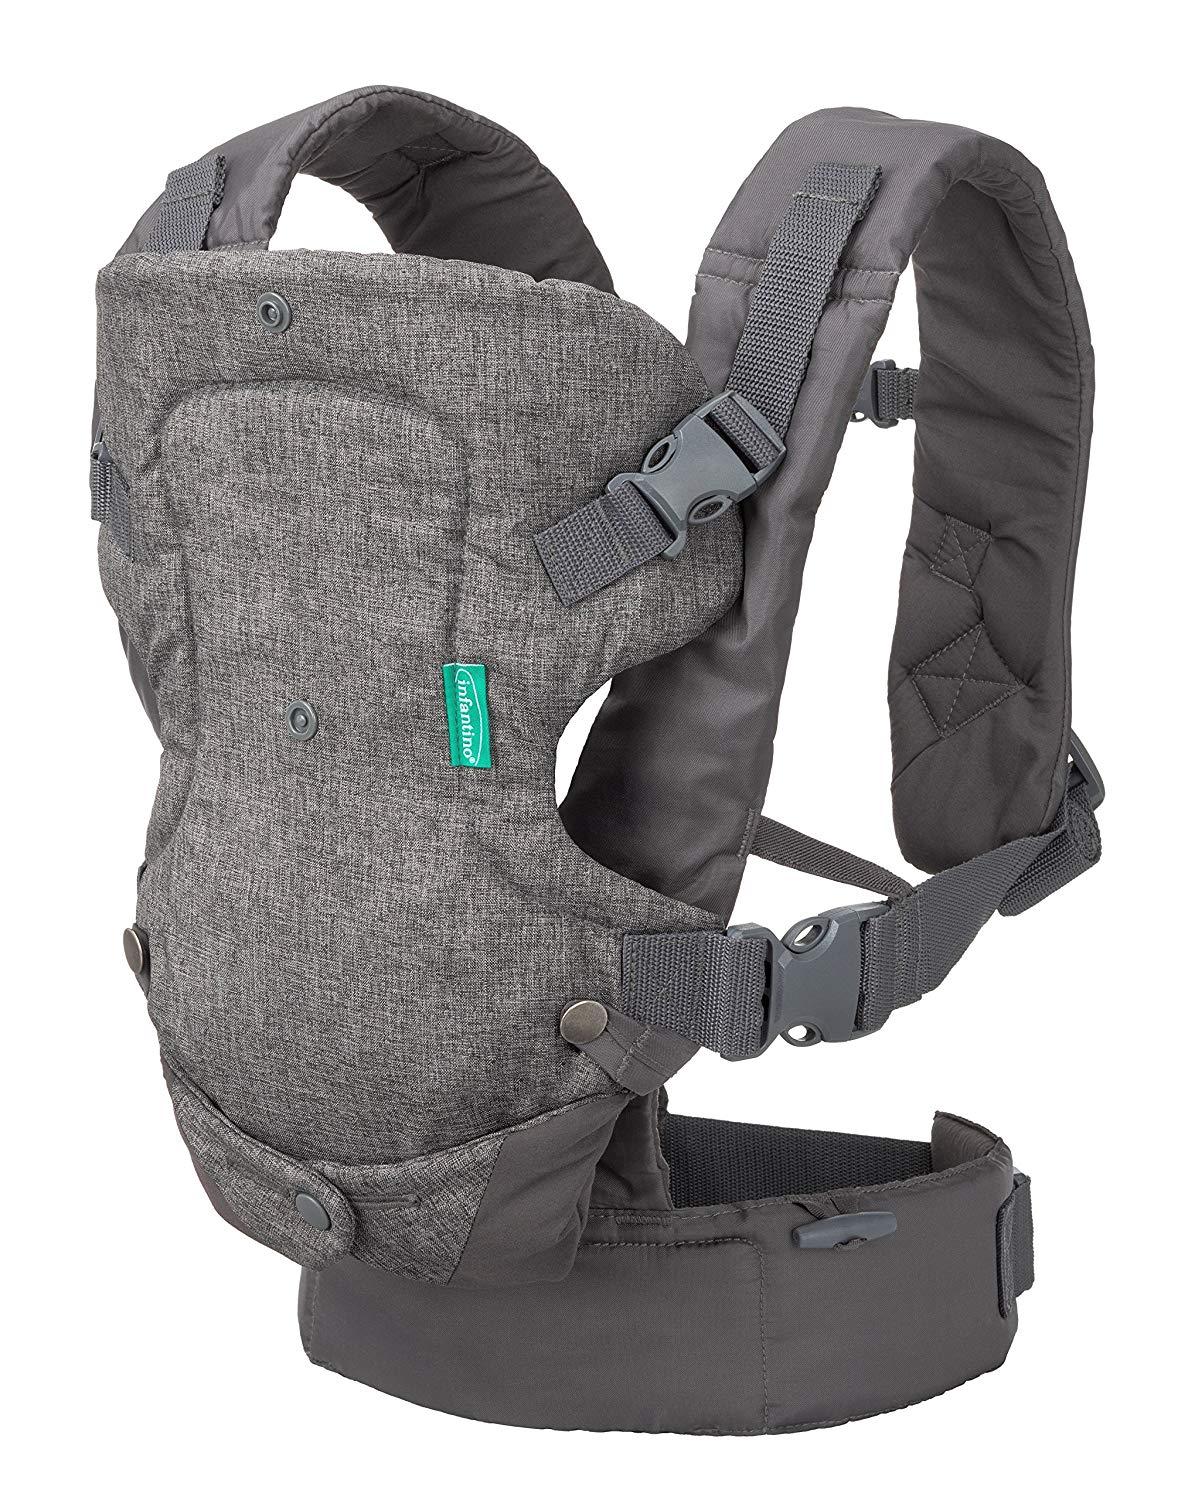 Infantino Flip 4-In-1 Convertible Carrier - Grey